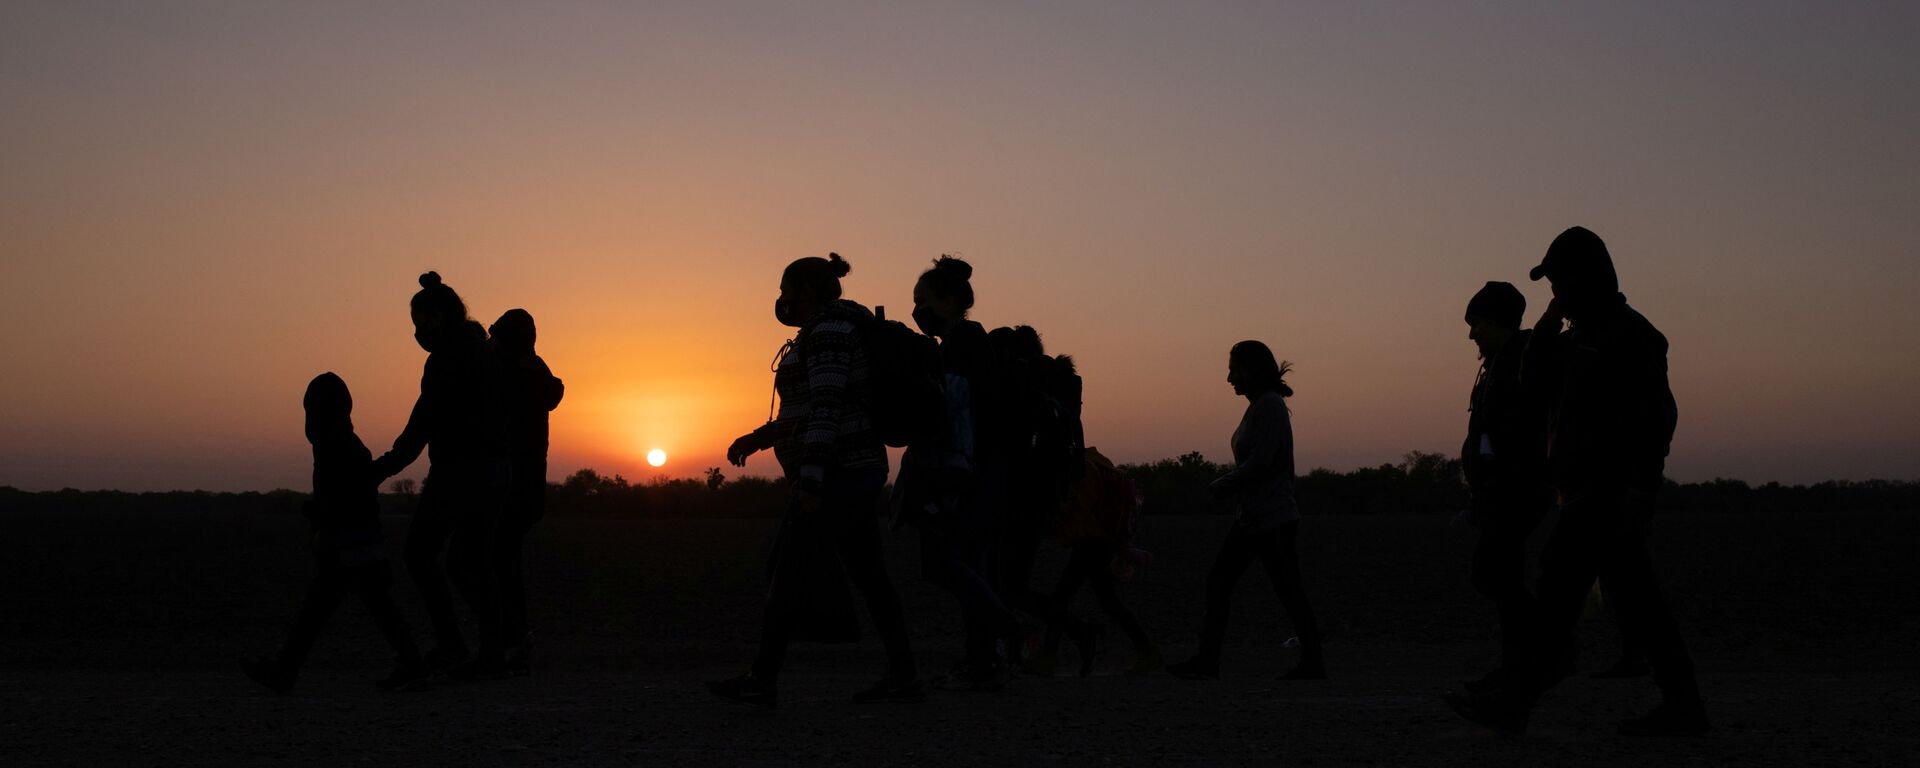 The sun rises as asylum-seeking migrants' families from Honduras and El Salvador walk towards the border wall after crossing the Rio Grande river into the United States from Mexico on a raft, in Penitas, Texas, U.S., March 26, 2021 - Sputnik International, 1920, 03.04.2022